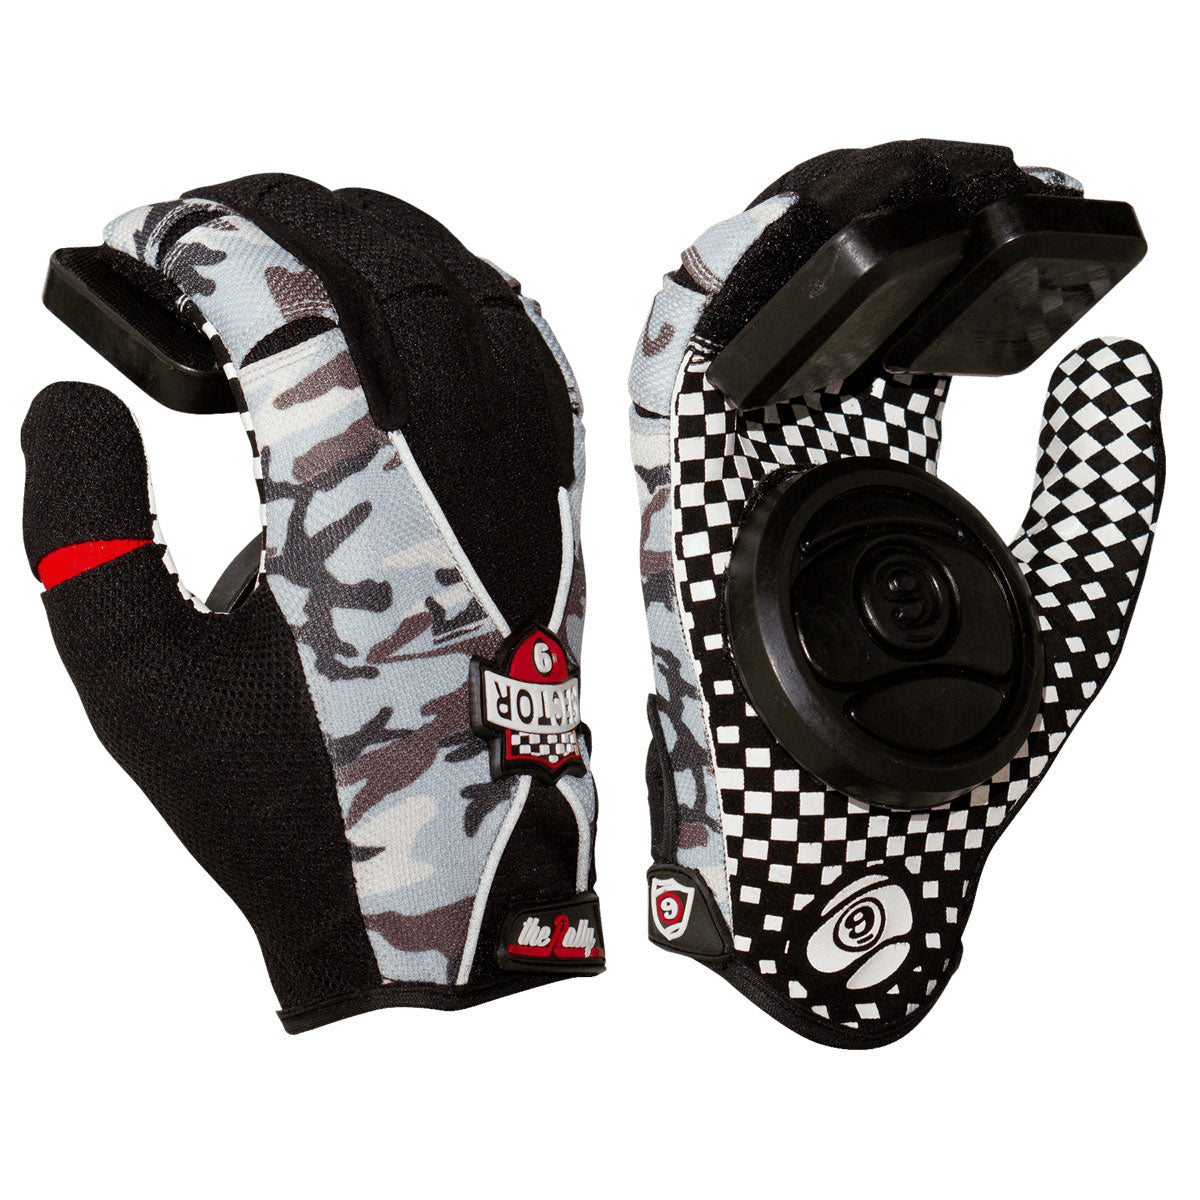 Sector 9 Rally Slide Gloves - Camo - SM/MD image 1